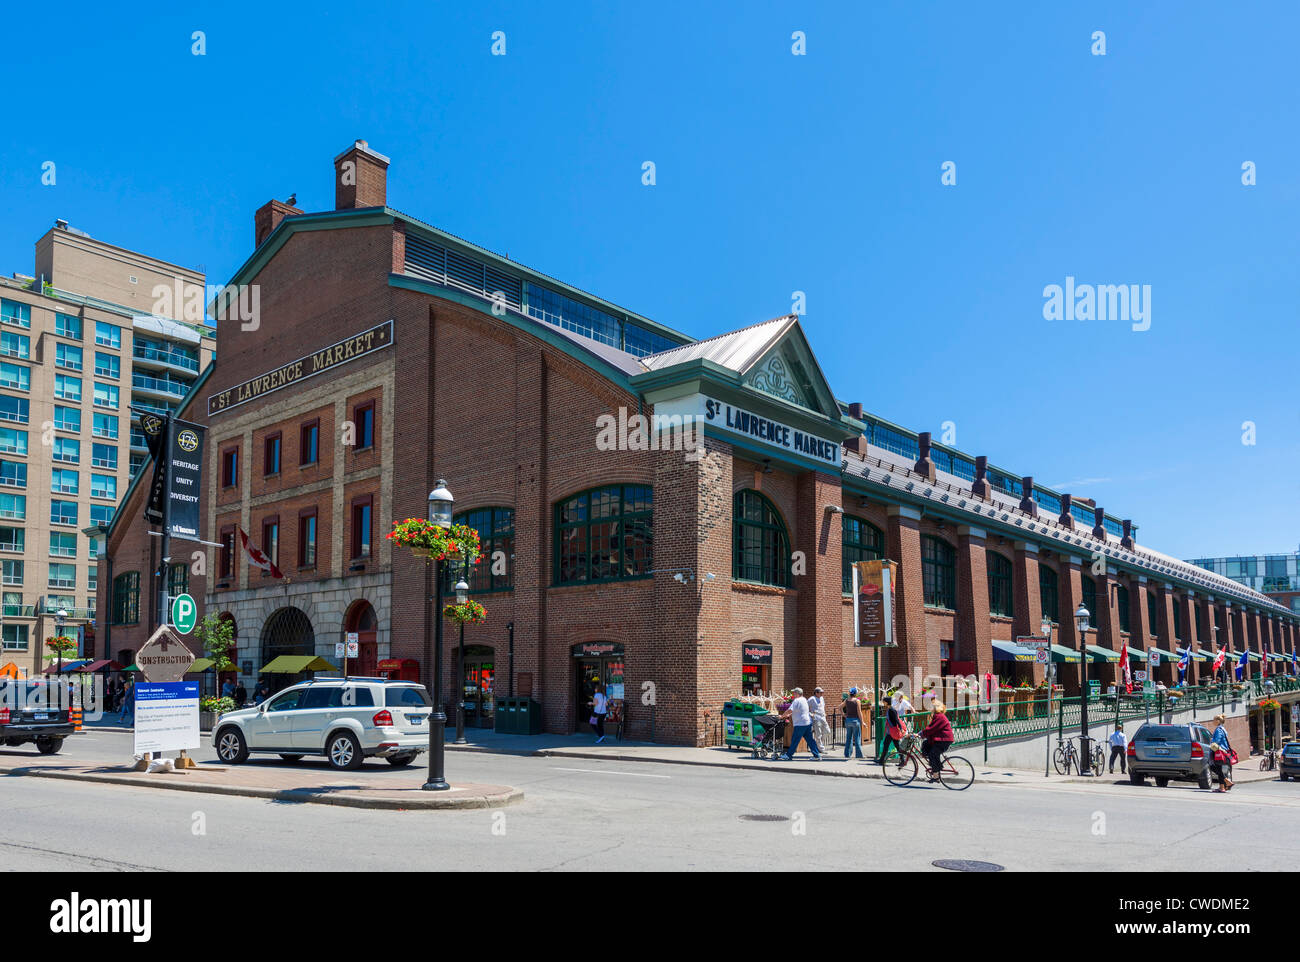 Exterior of St Lawrence Market looking towards downtown, Toronto, Ontario, Canada Stock Photo